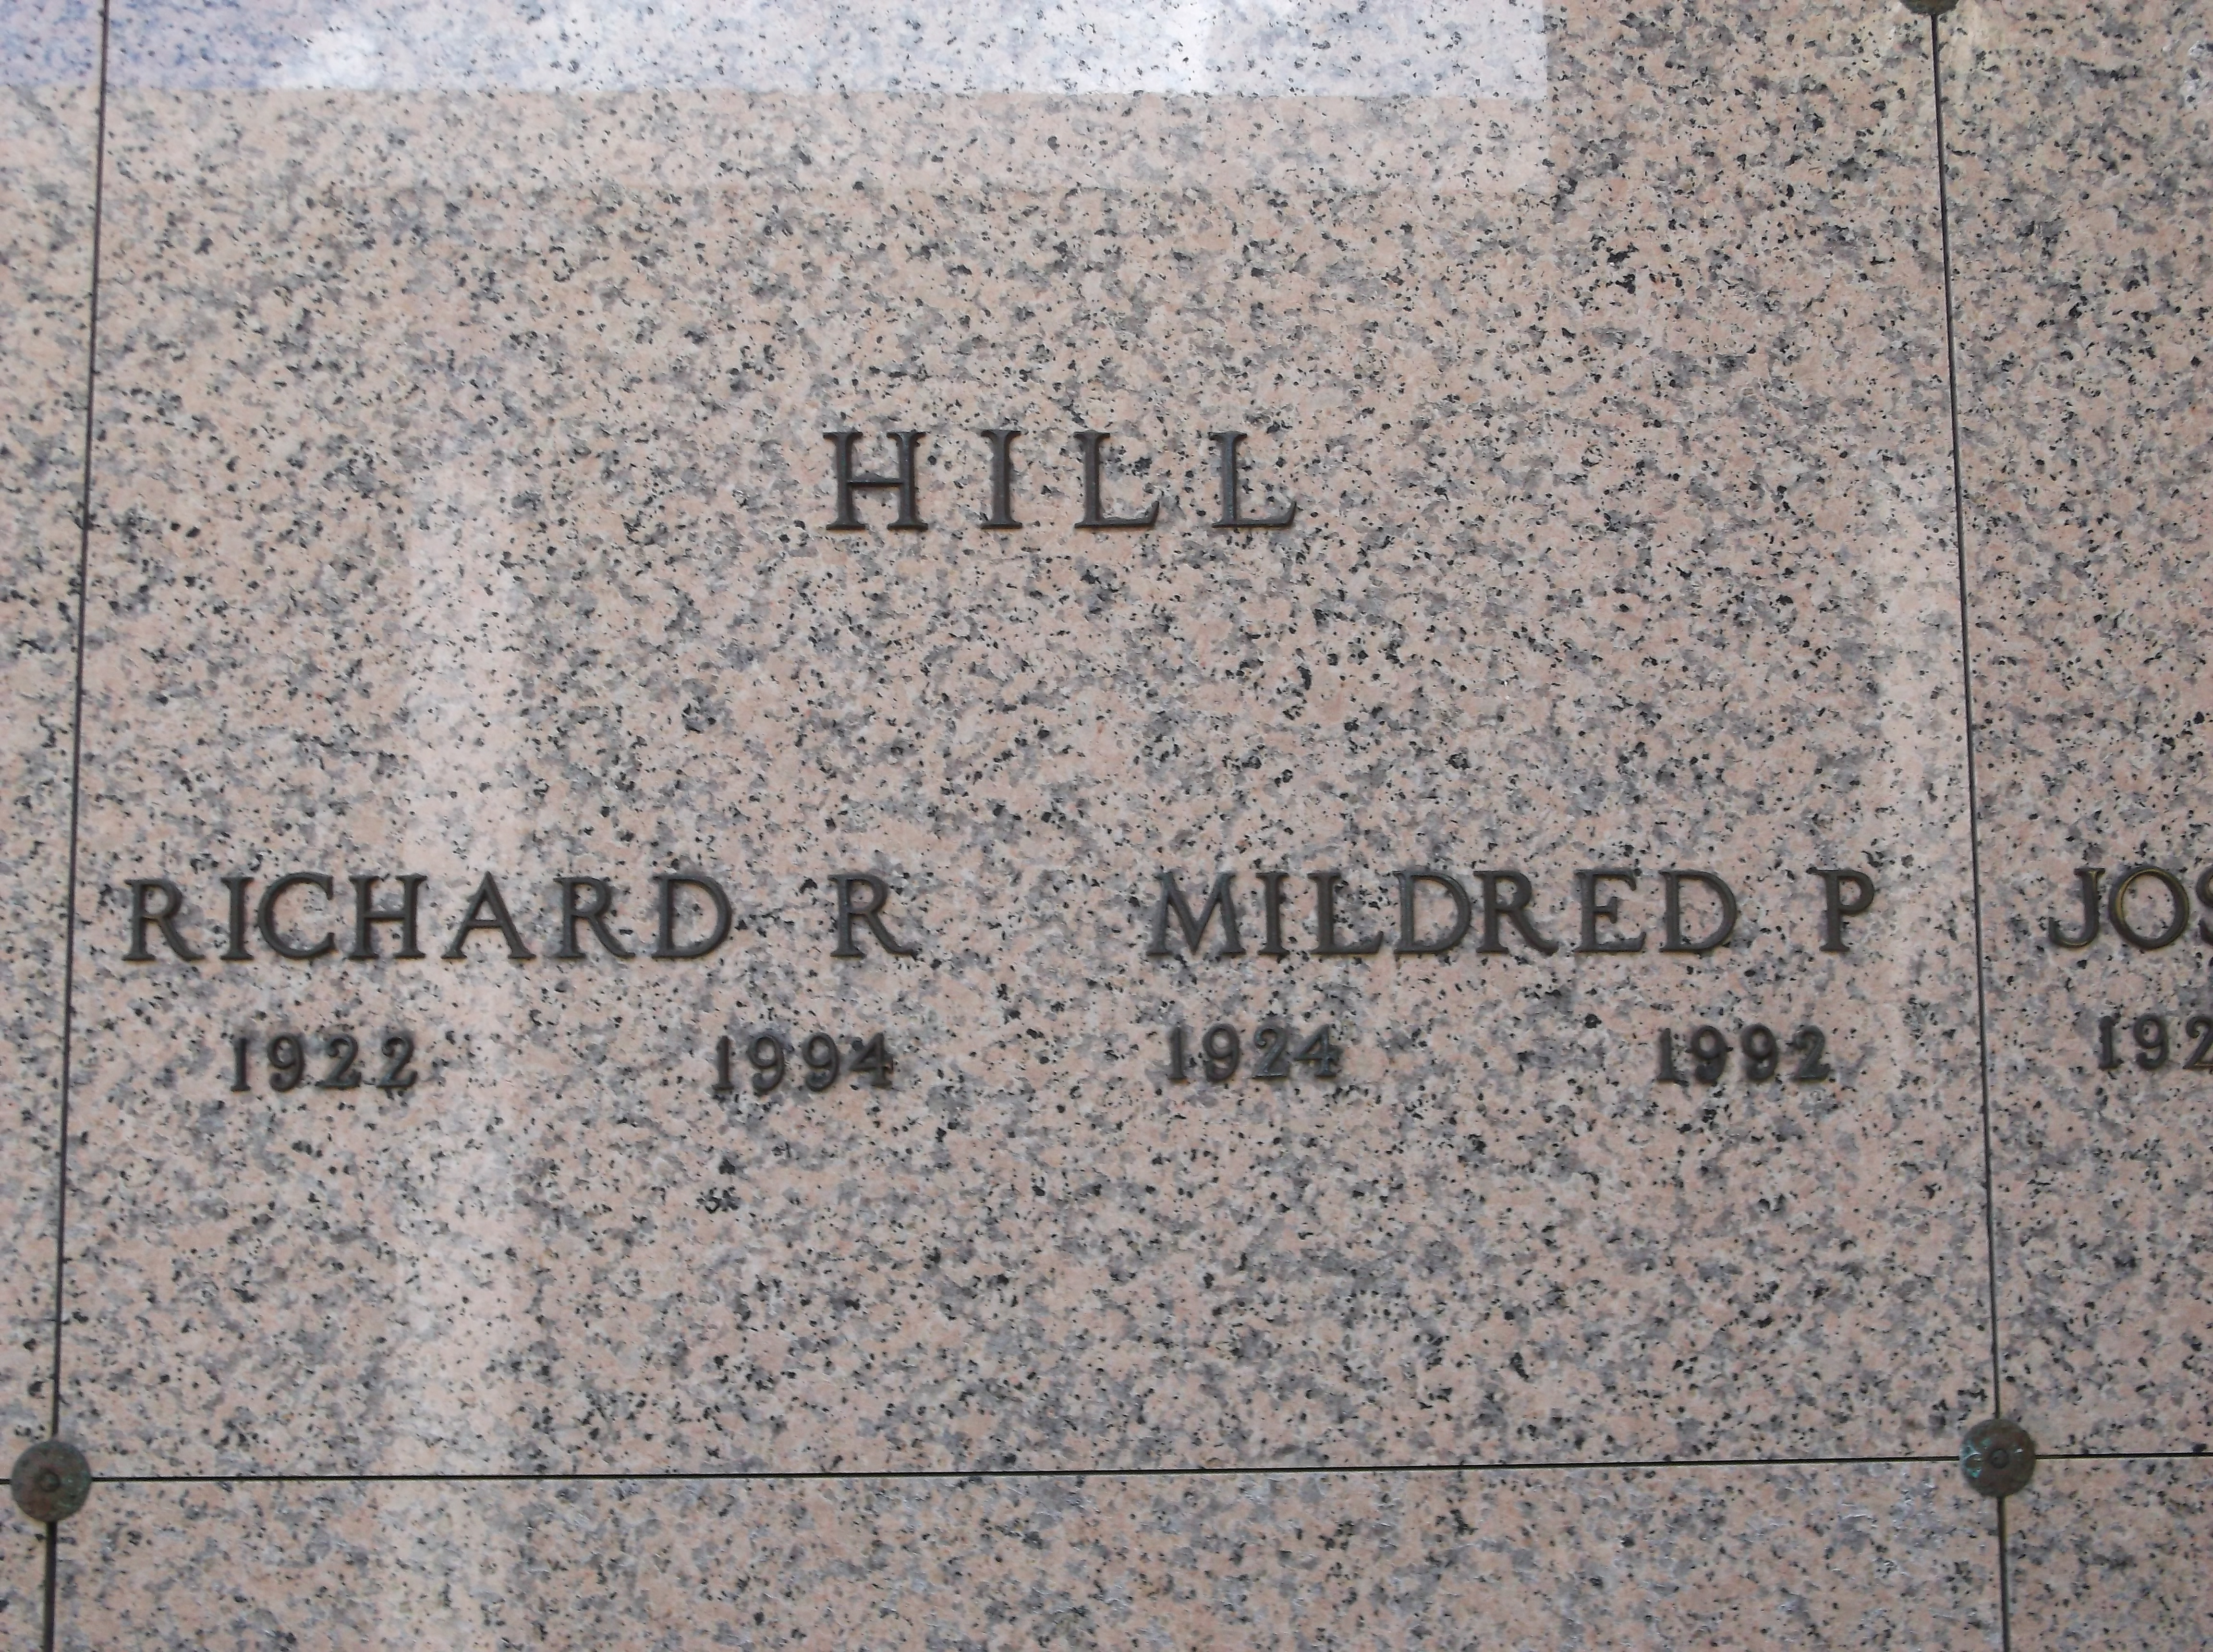 Mildred P Hill